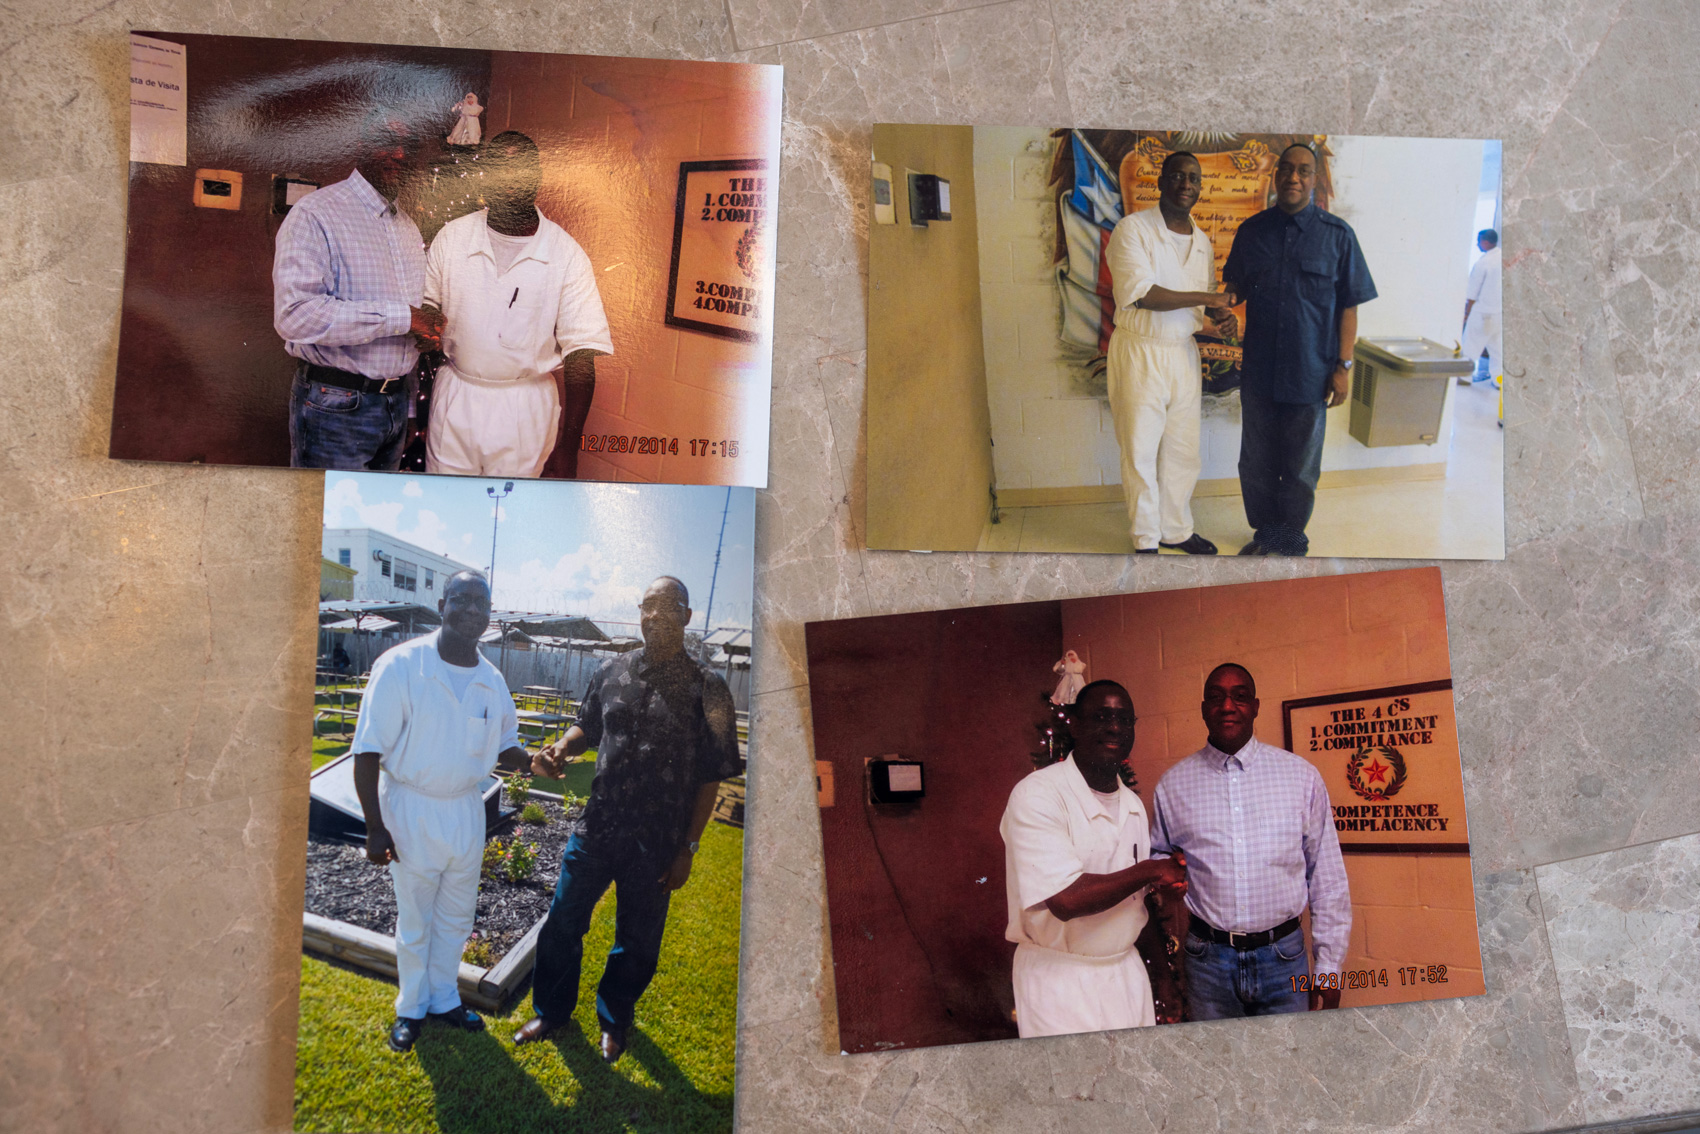 Photos of Sam Elam and his brother, Darius, during visits in prison are laid out on the dinning table at Sam's home, Tuesday, Sept. 26, in Houston. Darius is a former Texas Southern University student who has served 40 years in prison and claims he's innocent.